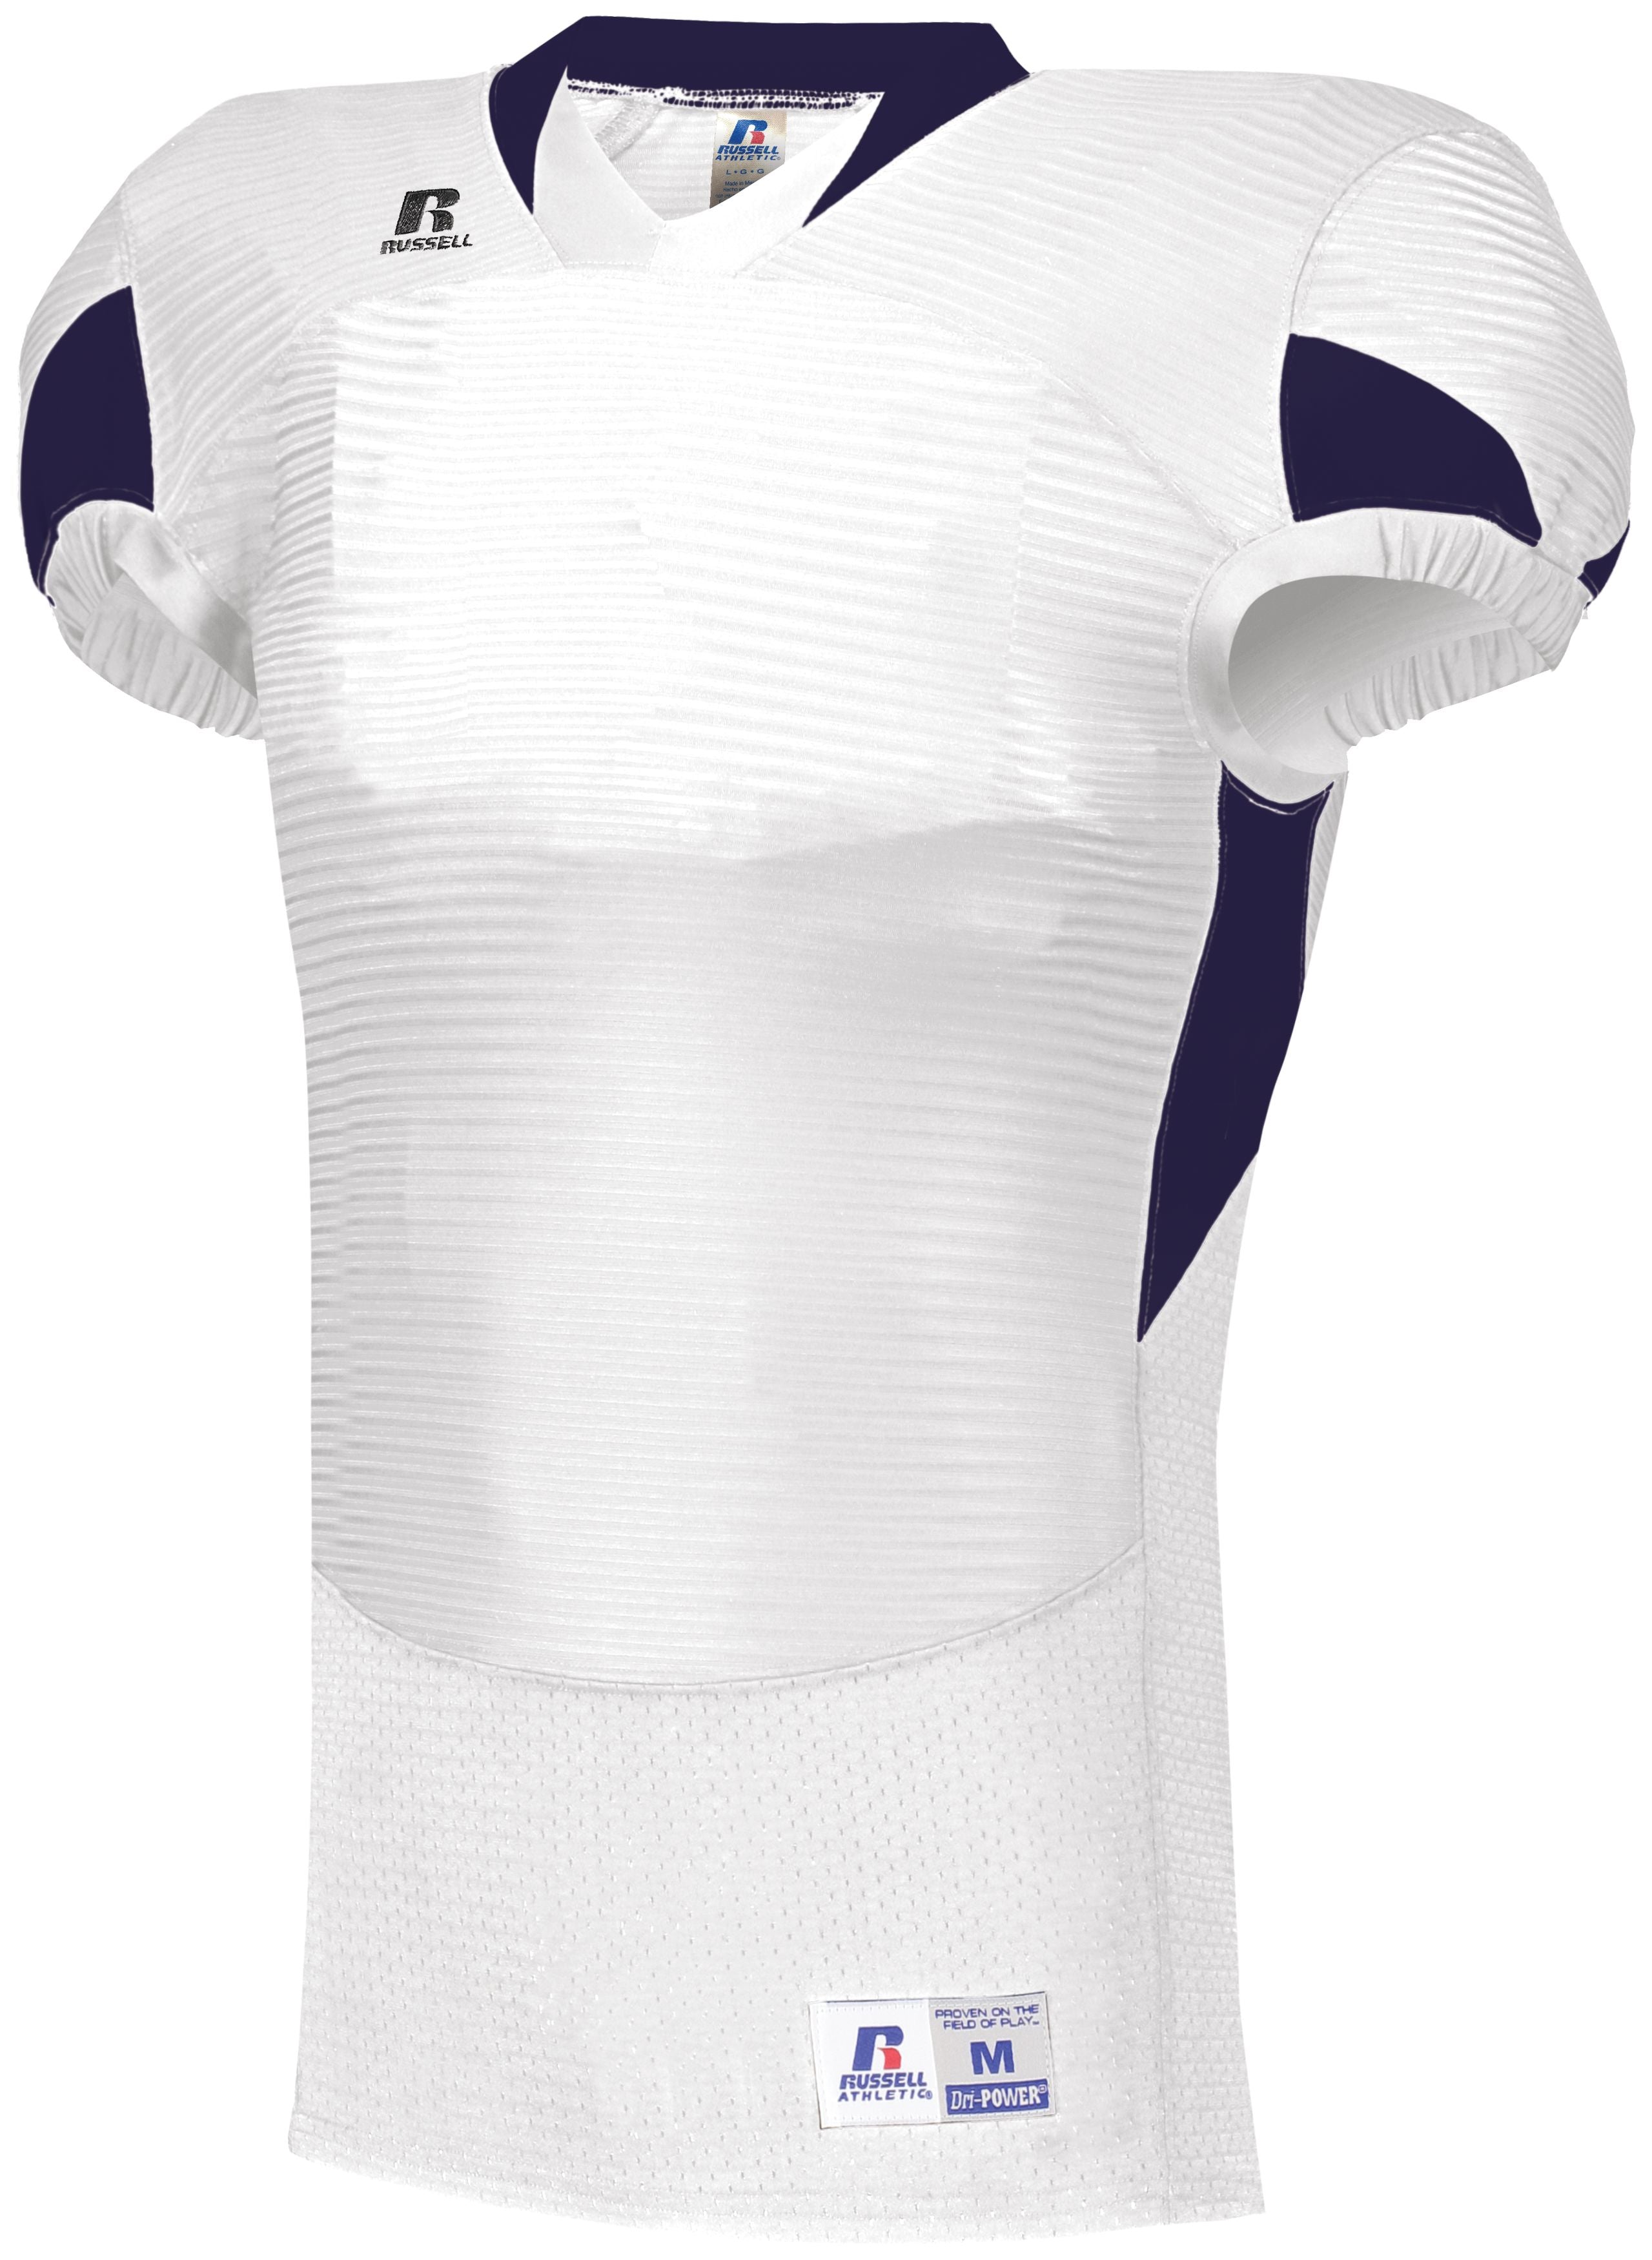 Russell Athletic Waist Length Football Jersey in White/Purple  -Part of the Adult, Adult-Jersey, Football, Russell-Athletic-Products, Shirts, All-Sports, All-Sports-1 product lines at KanaleyCreations.com